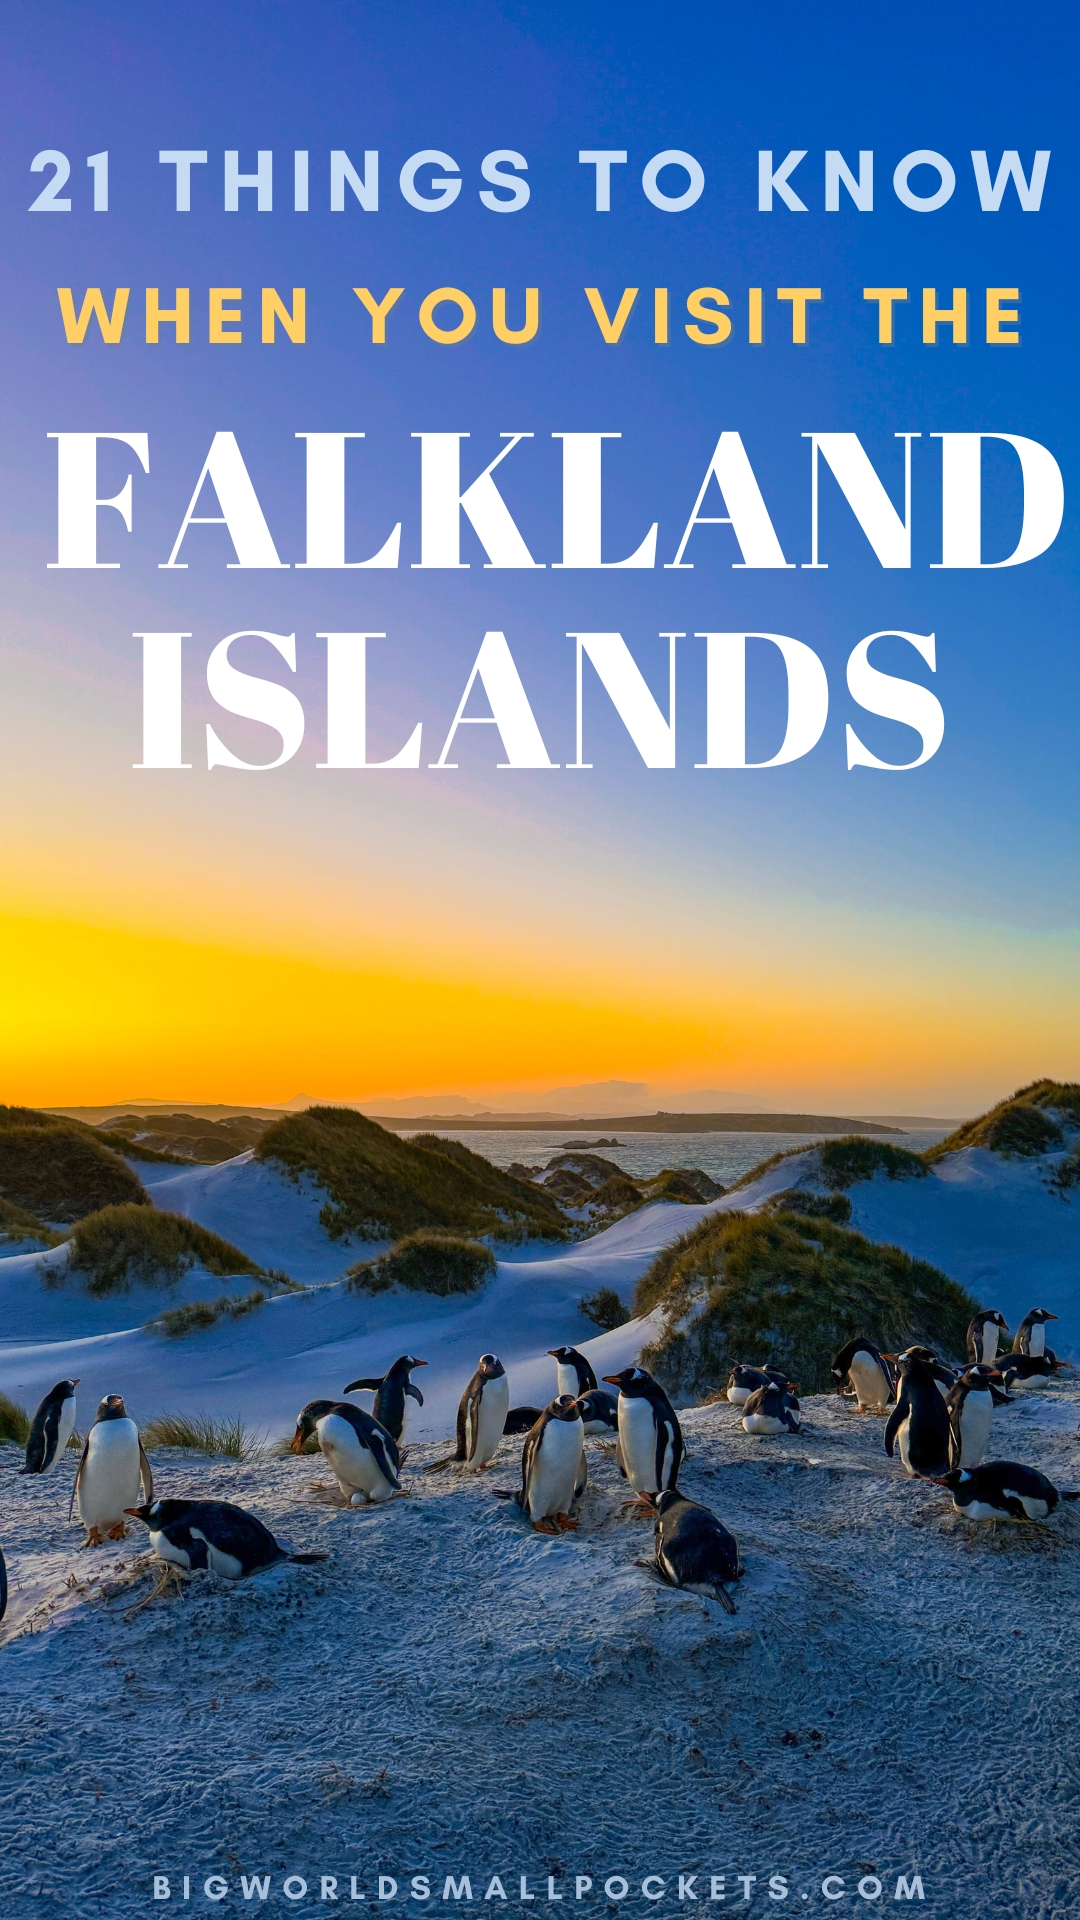 21 Things to Know When You Visit the Falkland Islands